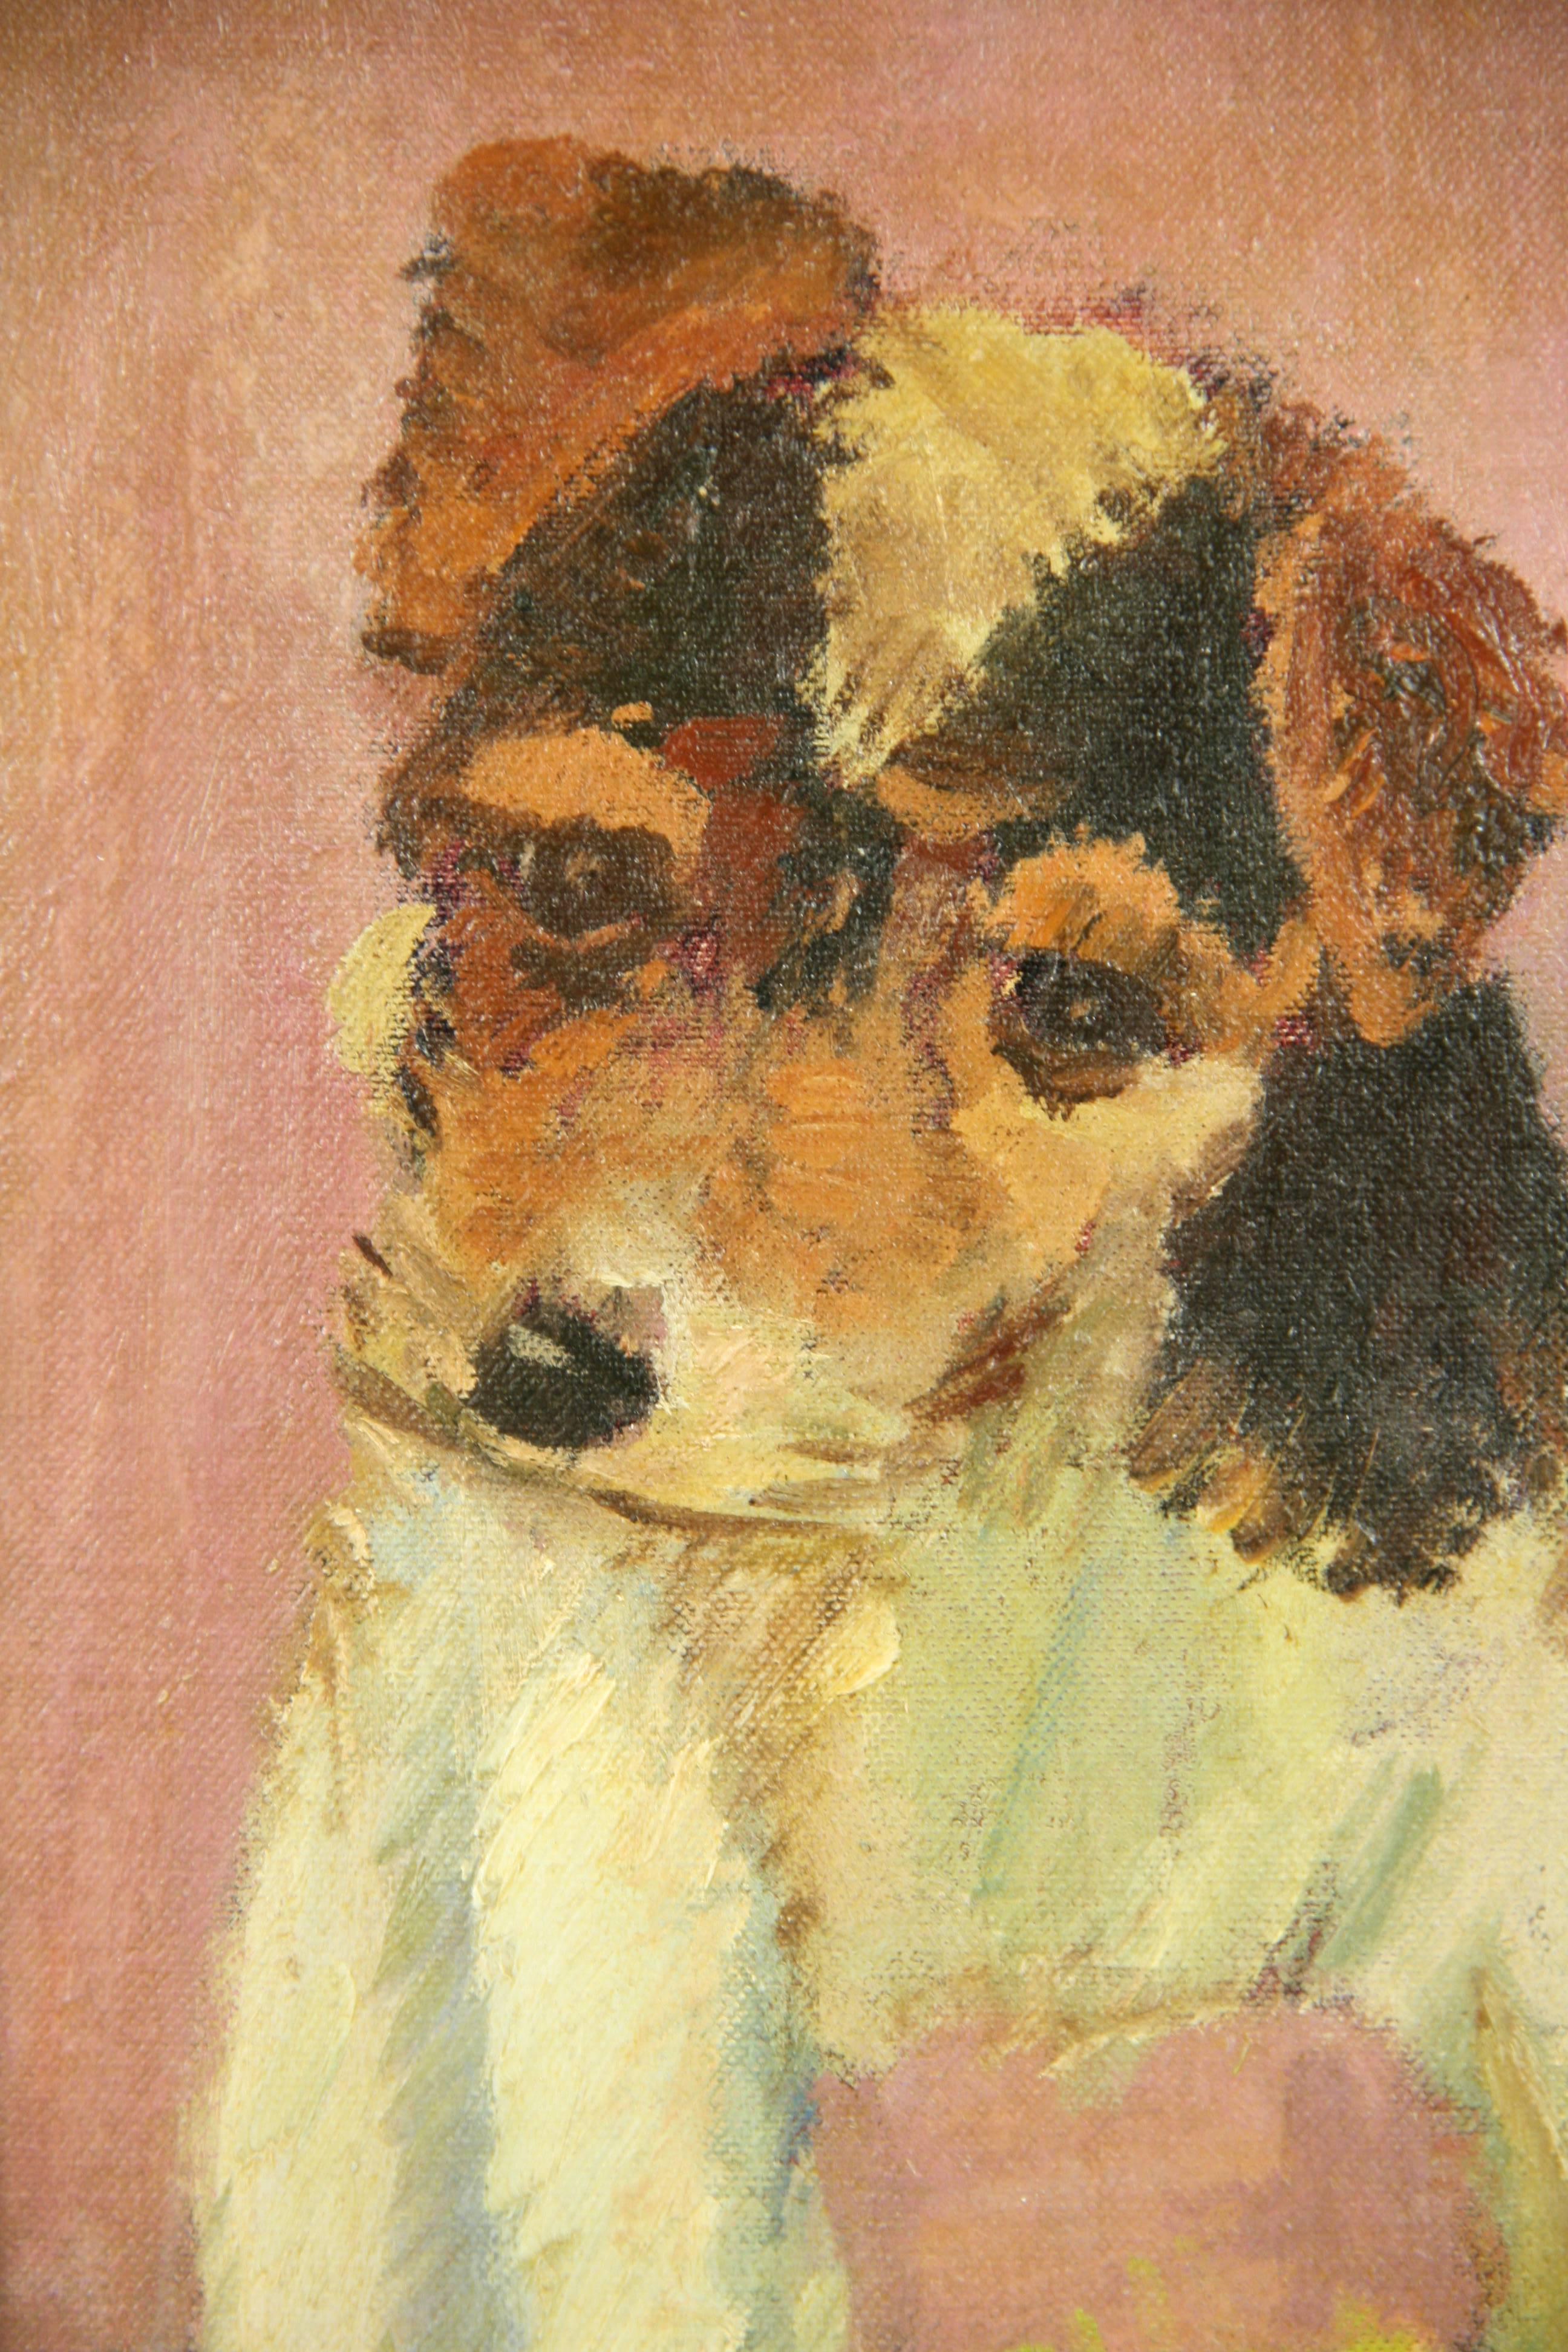 Jack Russel Puppy - Painting by Unknown